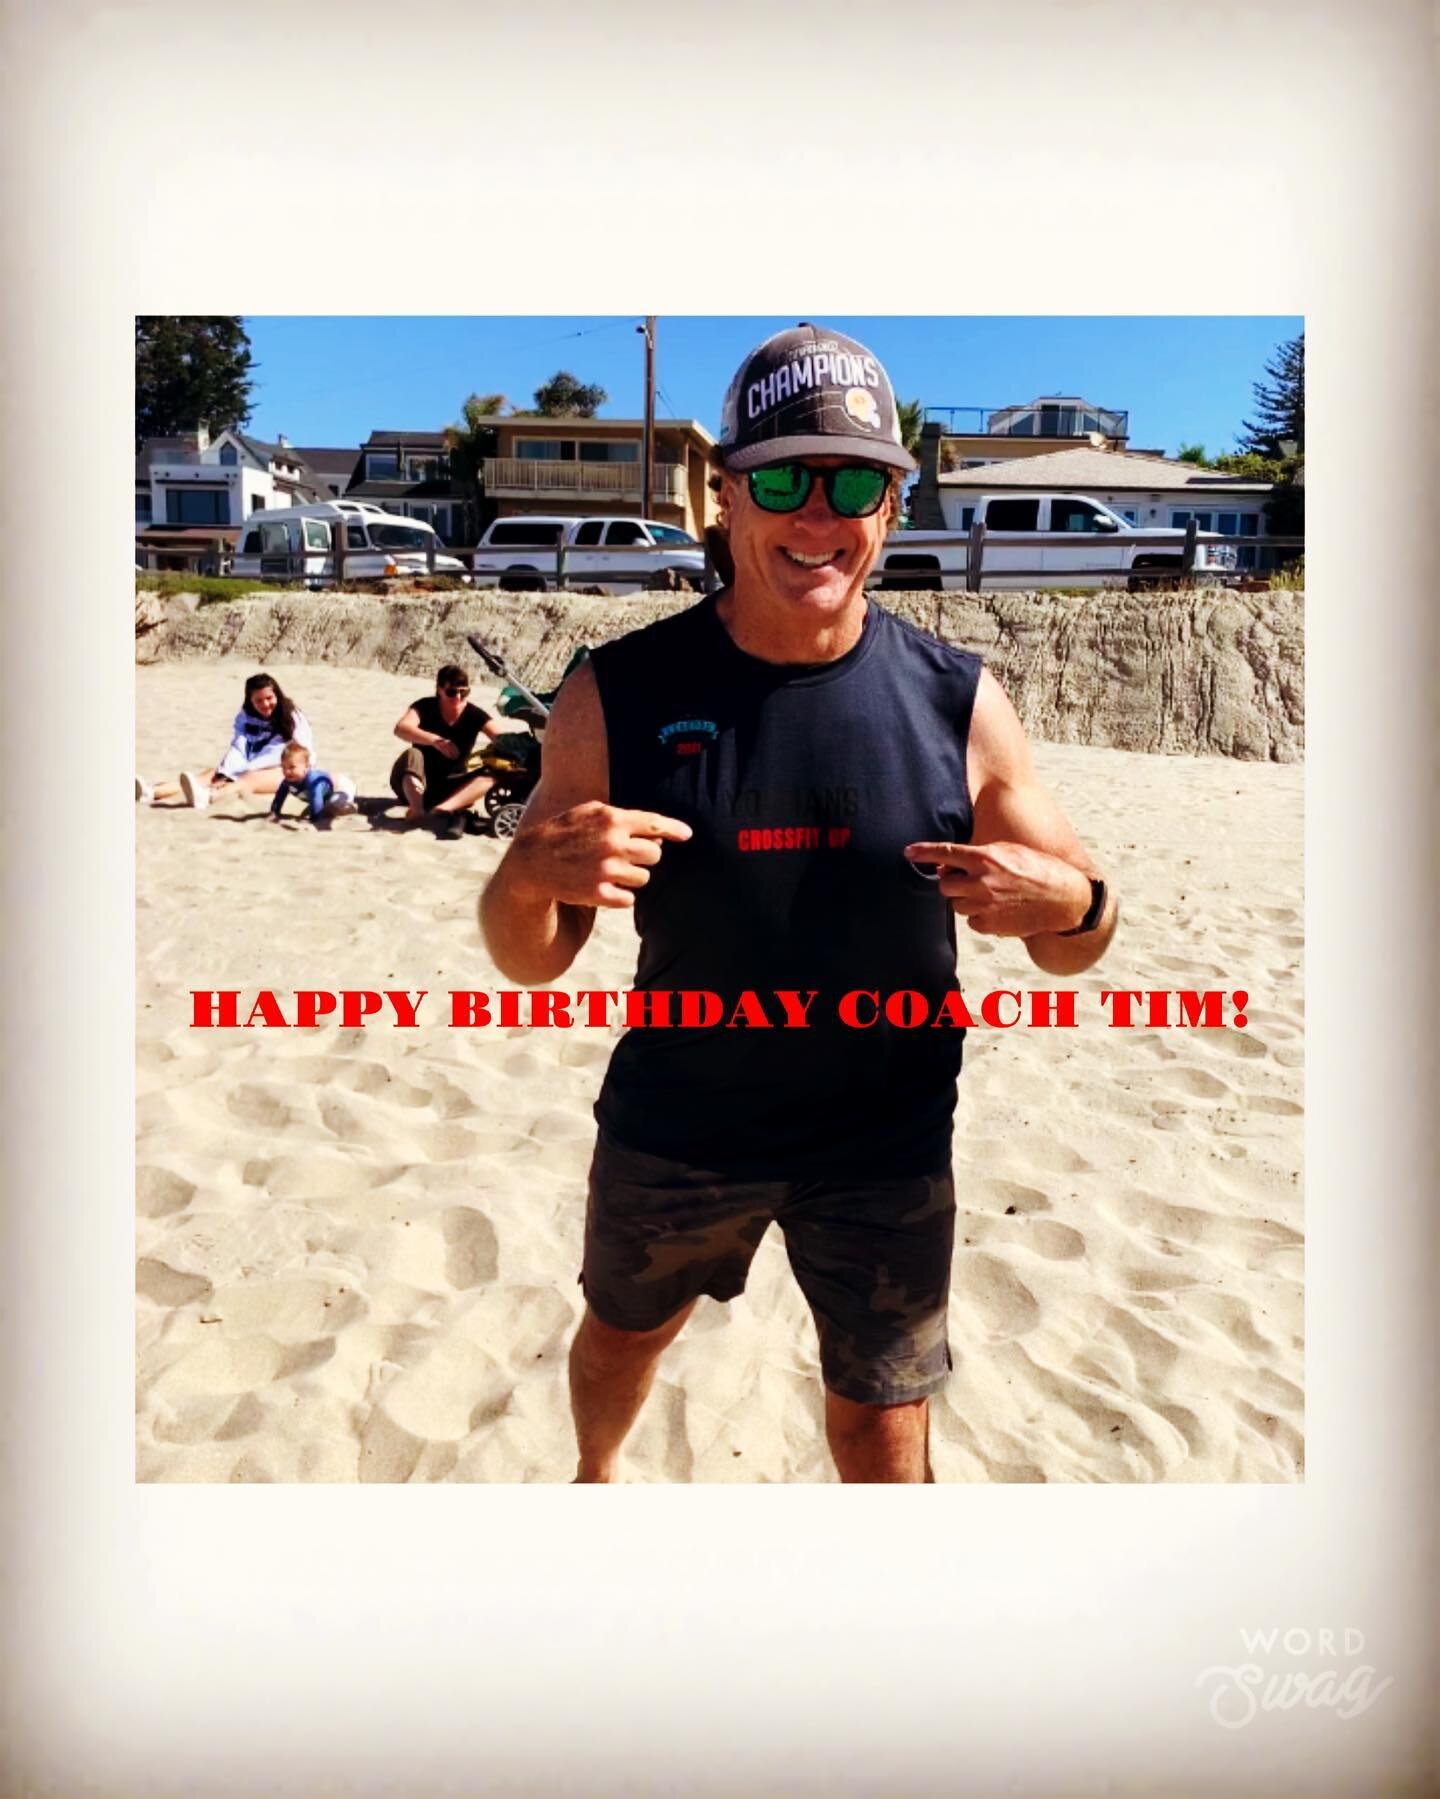 Happy Birthday!  We are very lucky to have a leader like you in the CFUP community.  You are an amazing human, coach, and athlete.  Keep the Tim(isms) coming and enjoy the day!